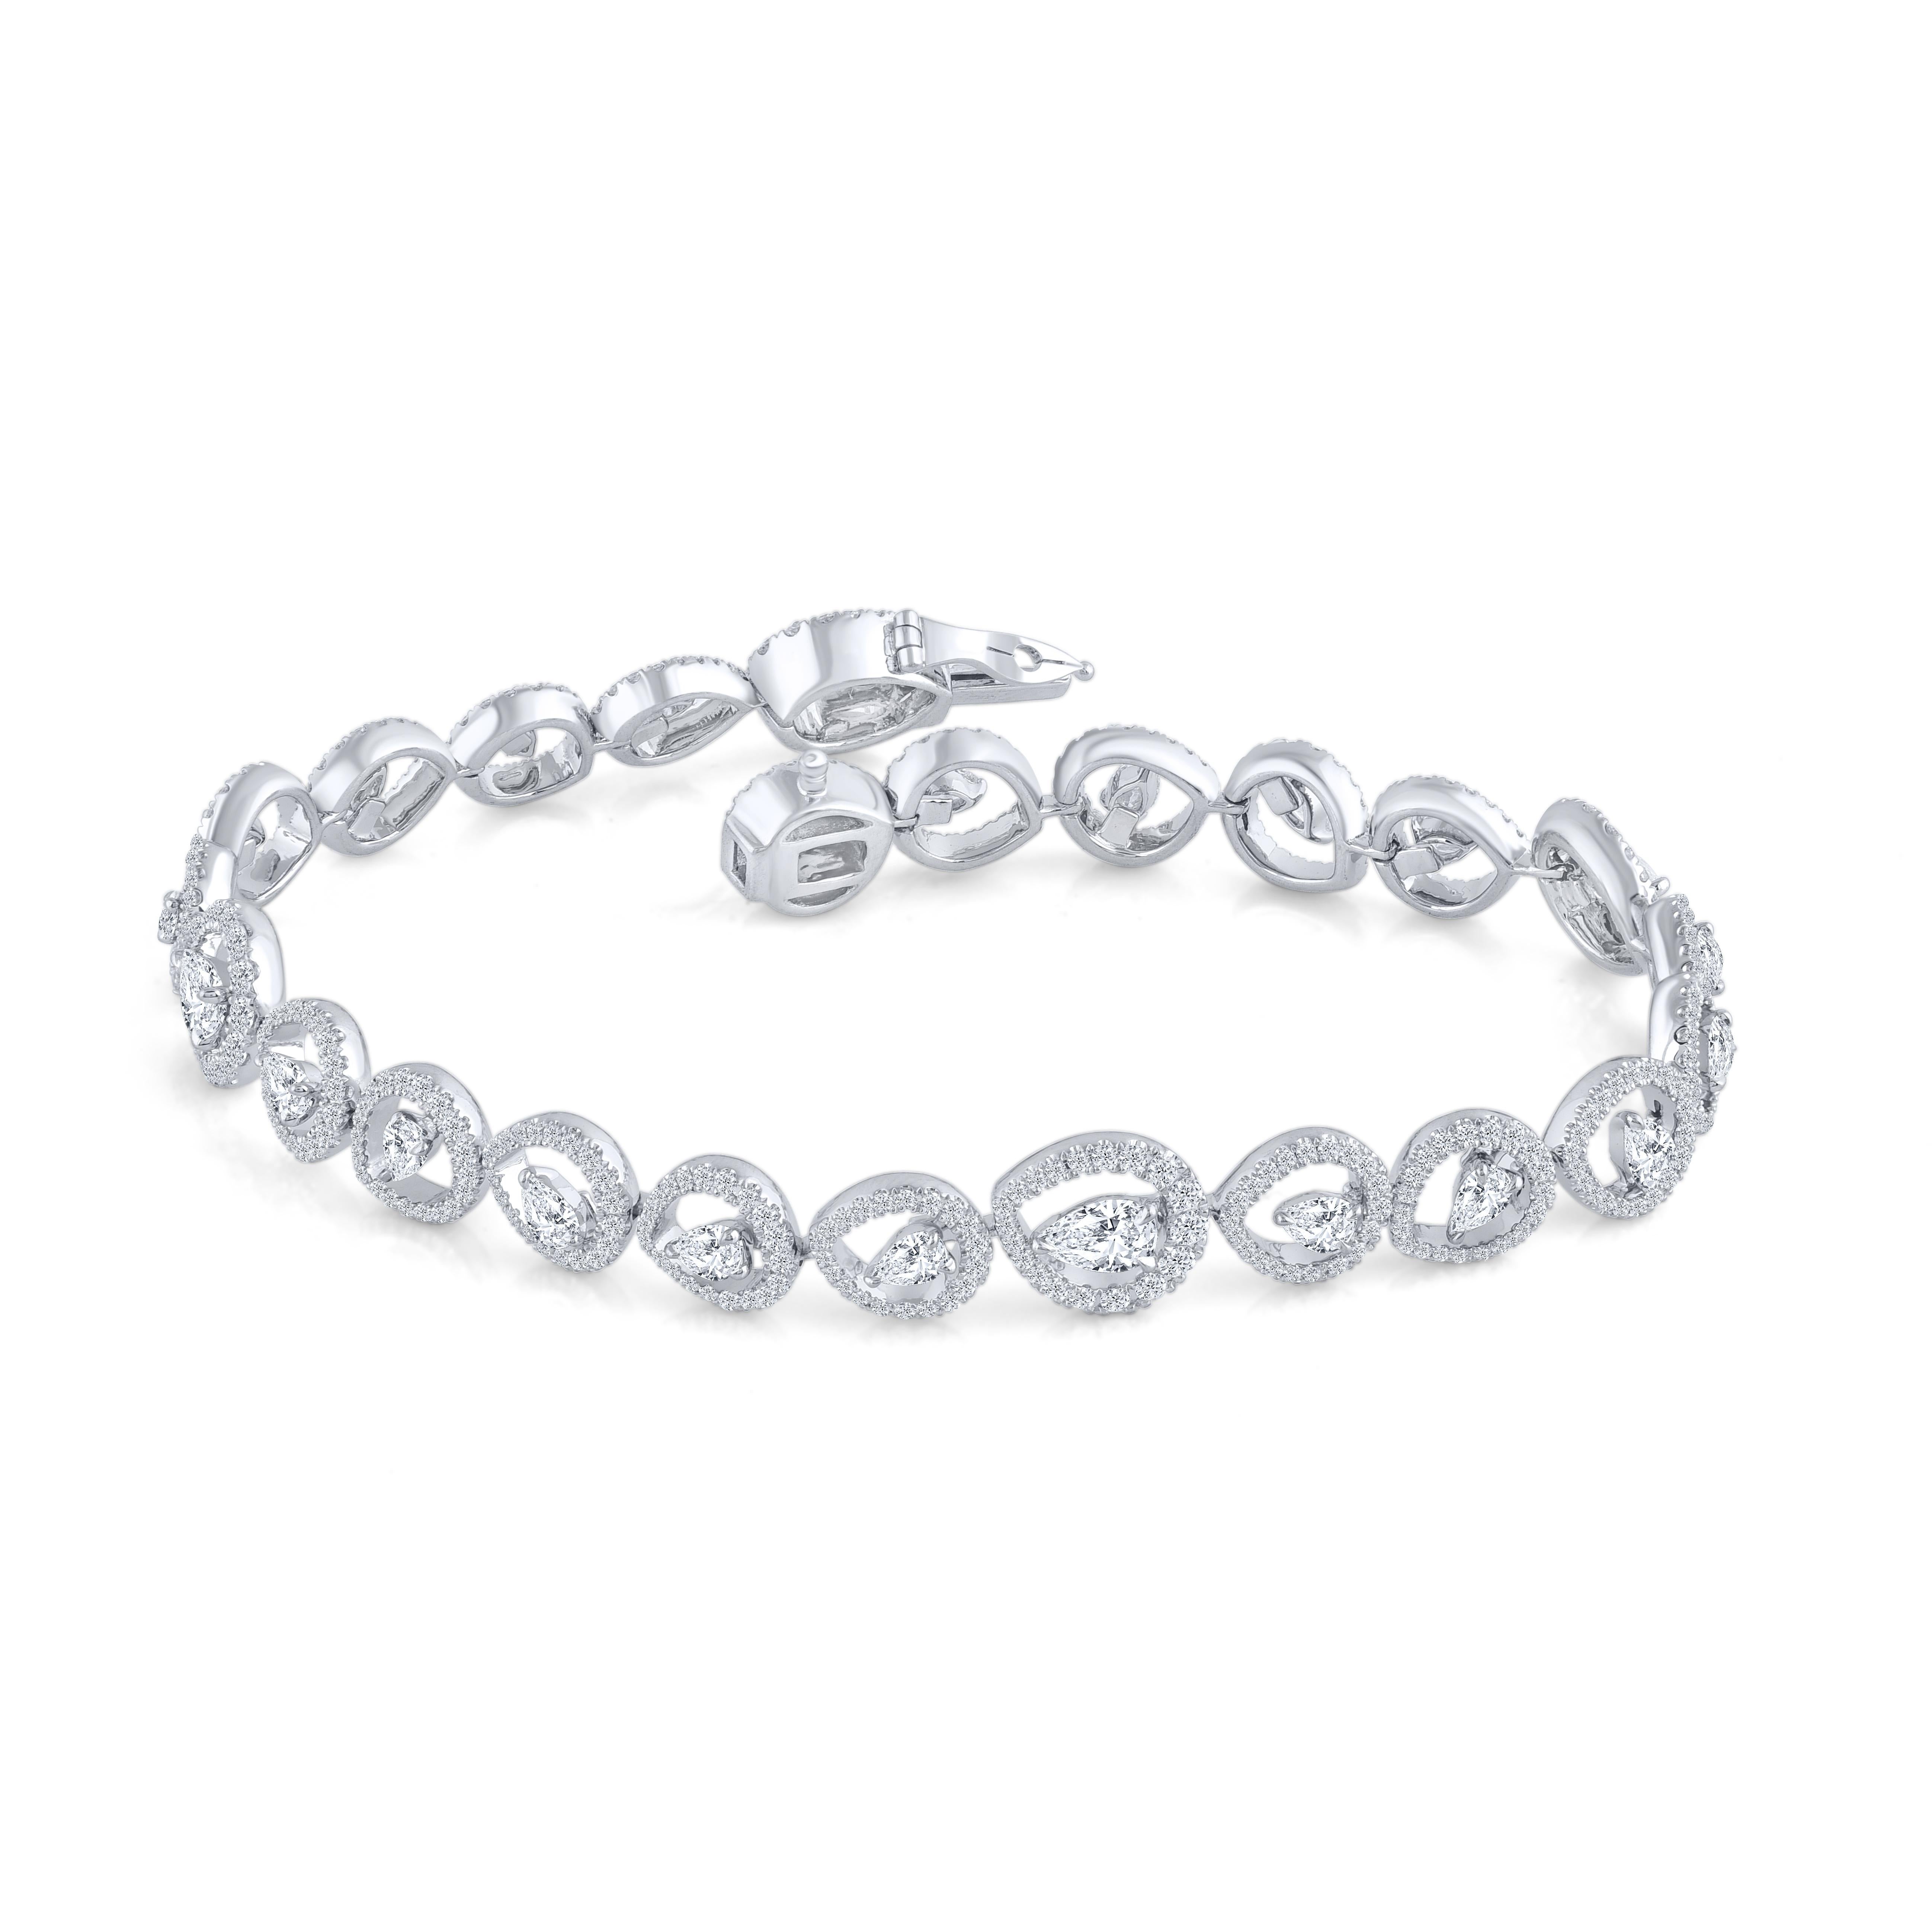 A beautiful tennis bracelet featuring a total of exquisite 480 colorless diamonds – 456 brilliant cut diamonds and 24 pear shape diamonds set in 18 KT white gold. 

All are diamonds are graded D-F color, IF-VS clarity. This piece will be accompanied